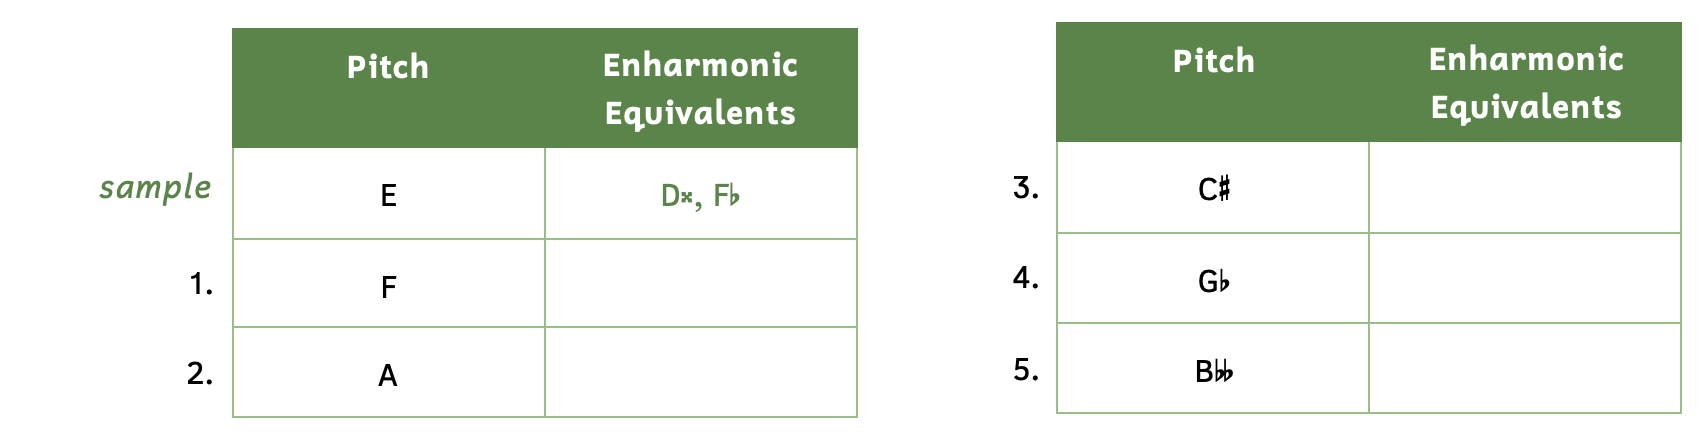 Table of exercises writing enharmonic equivalents. The first column gives you the pitch and in the second column you are to write two enharmonic equivalents. The sample gives you E. The answers are D-double sharp and F-flat. Number 1, F. Number 2, A. Number 3, C-sharp. Number 4, G-flat. Number 5, B-double flat.